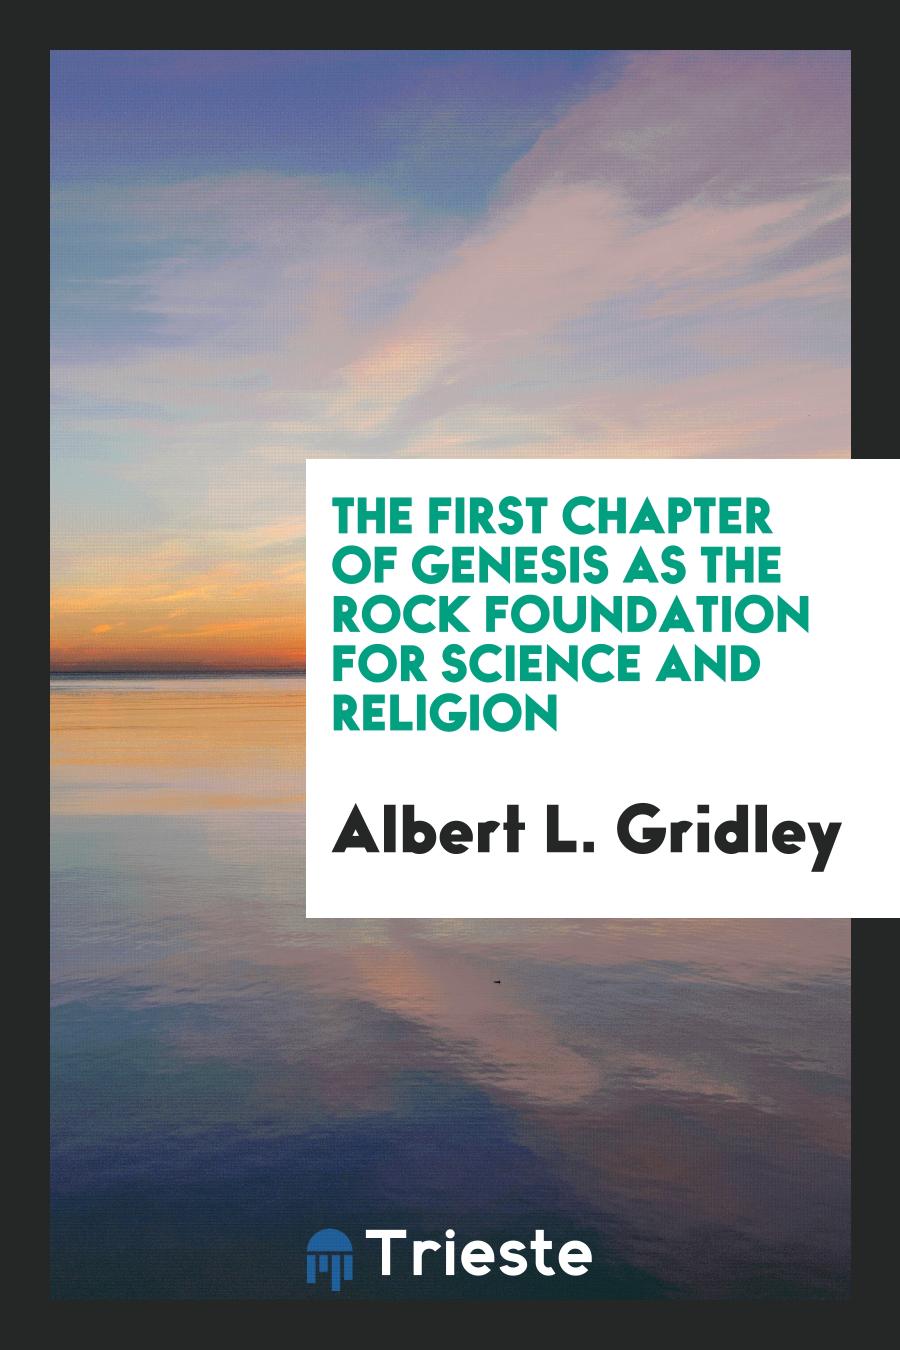 The First Chapter of Genesis as the Rock Foundation for Science and Religion